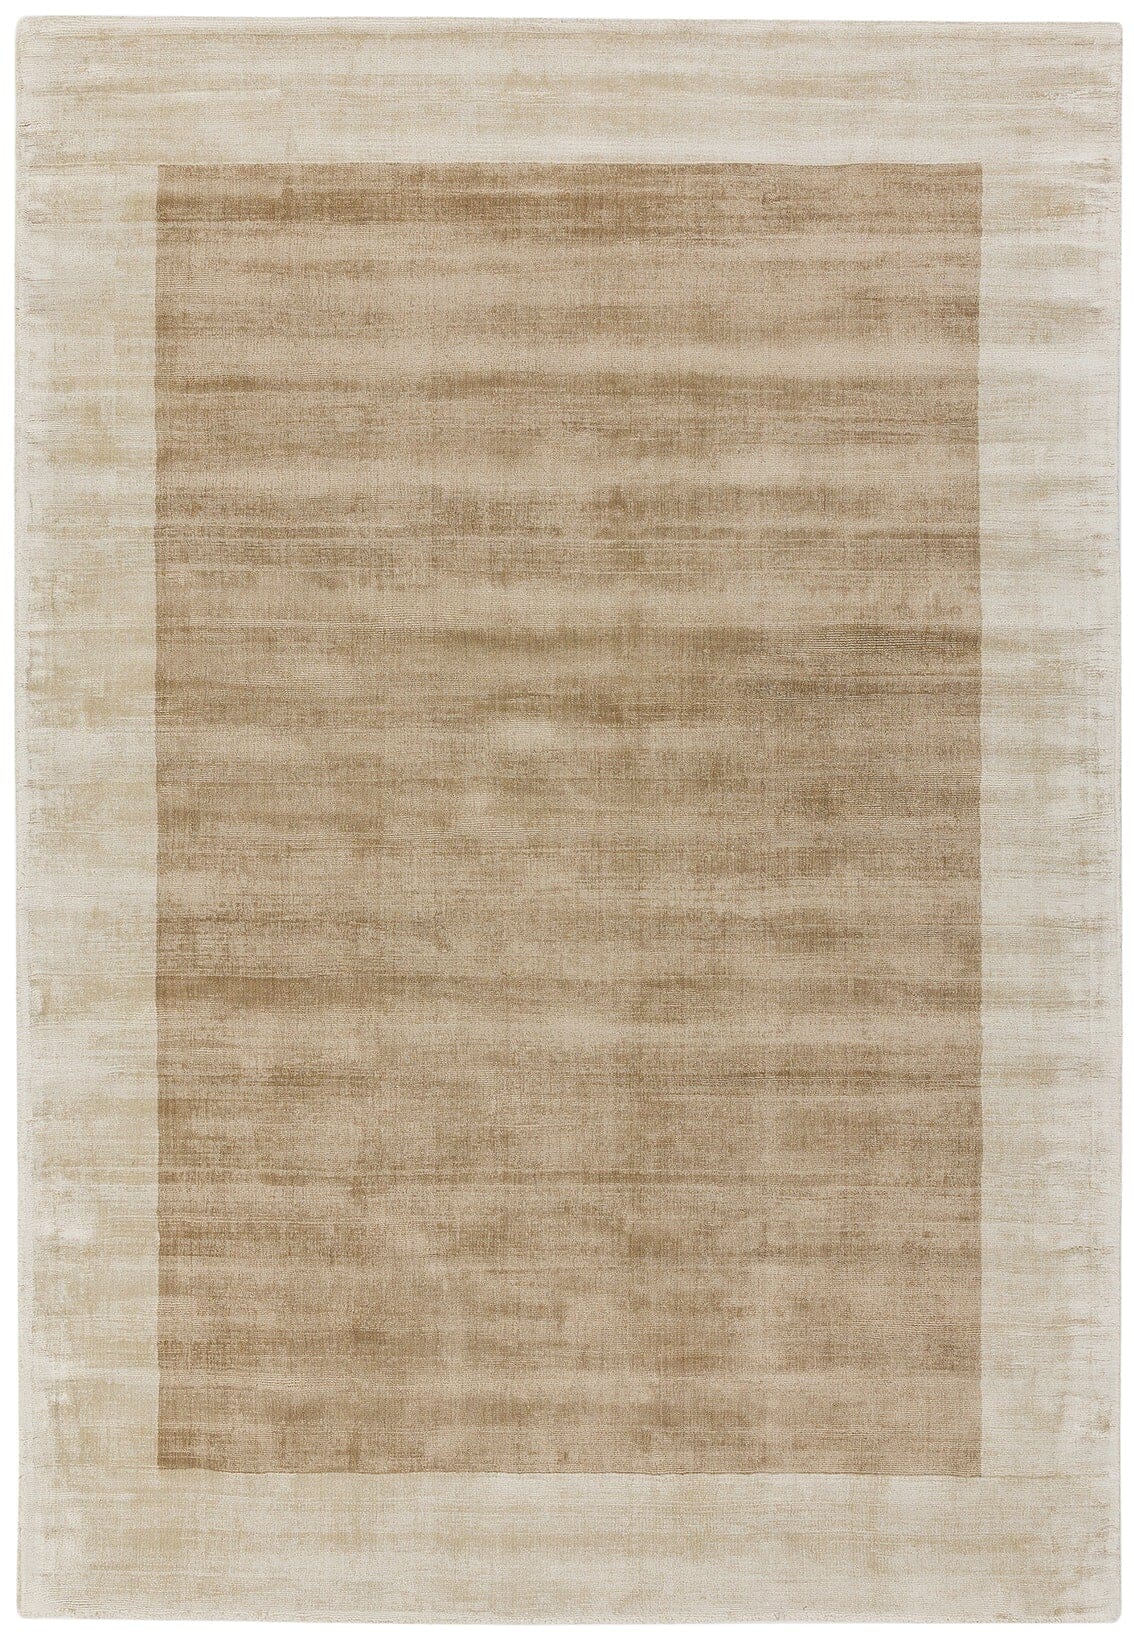 Asiatic Carpets Blade Hand Woven Rug Putty Champagne - 120 x 170cm